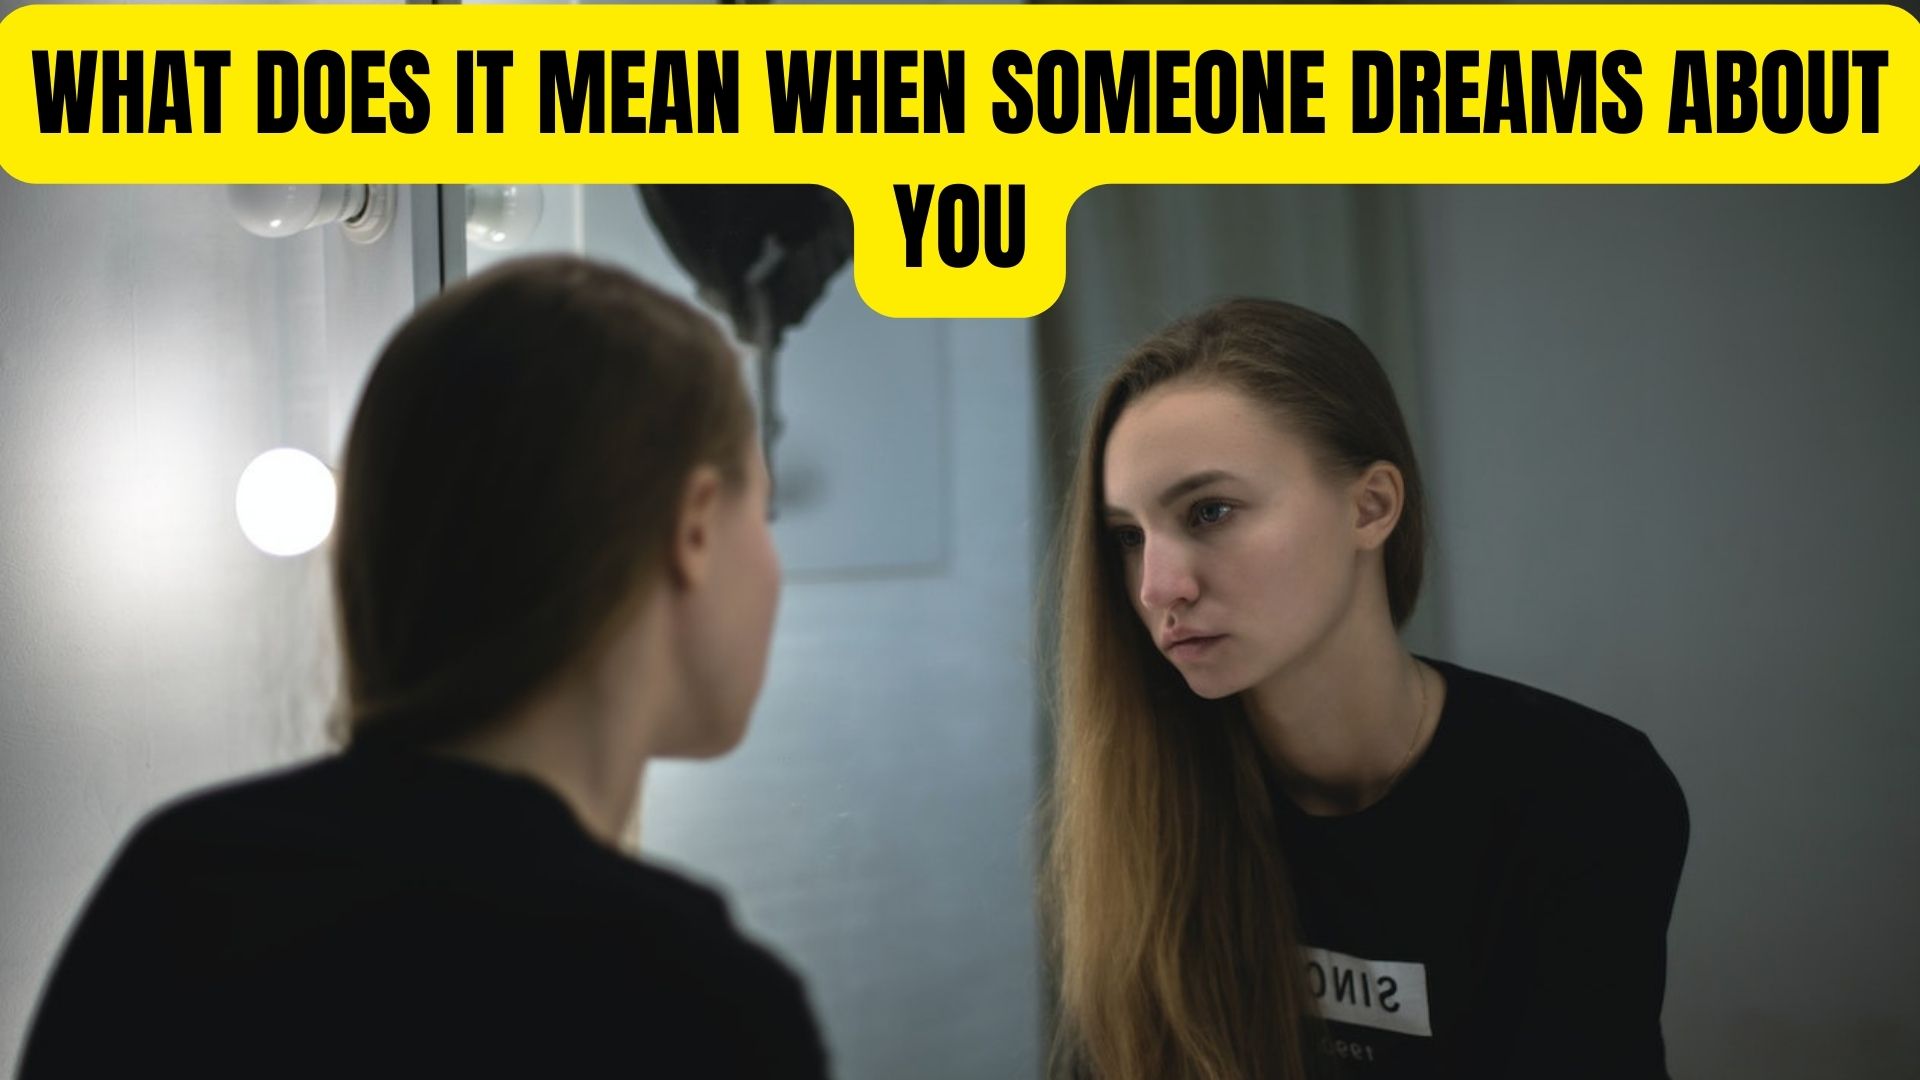 What Does It Mean When Someone Dreams About You?